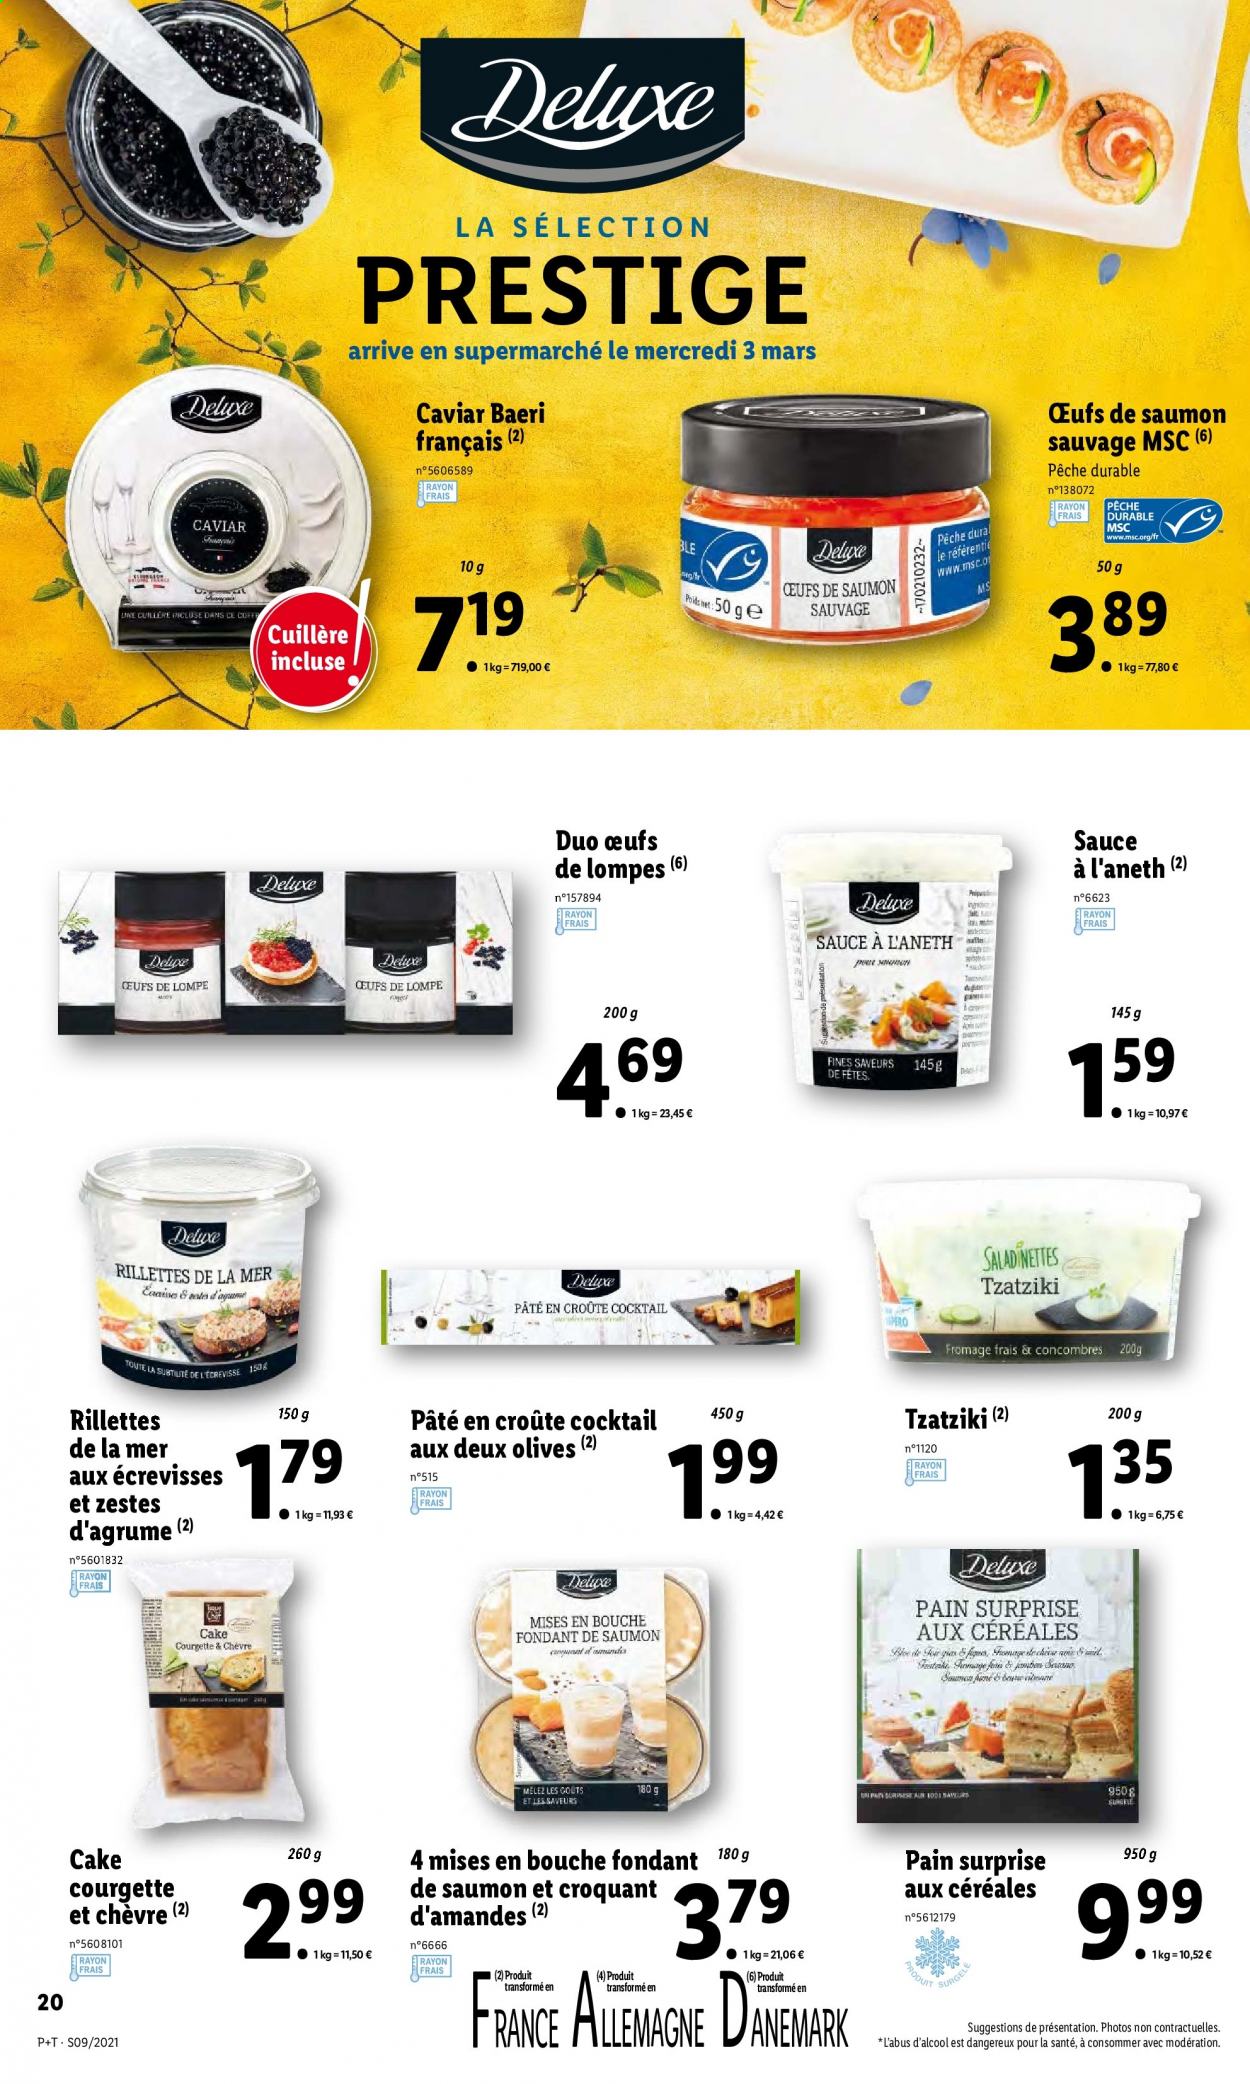 Catalogue Lidl - 03.03.2021 - 09.03.2021. Page 20.